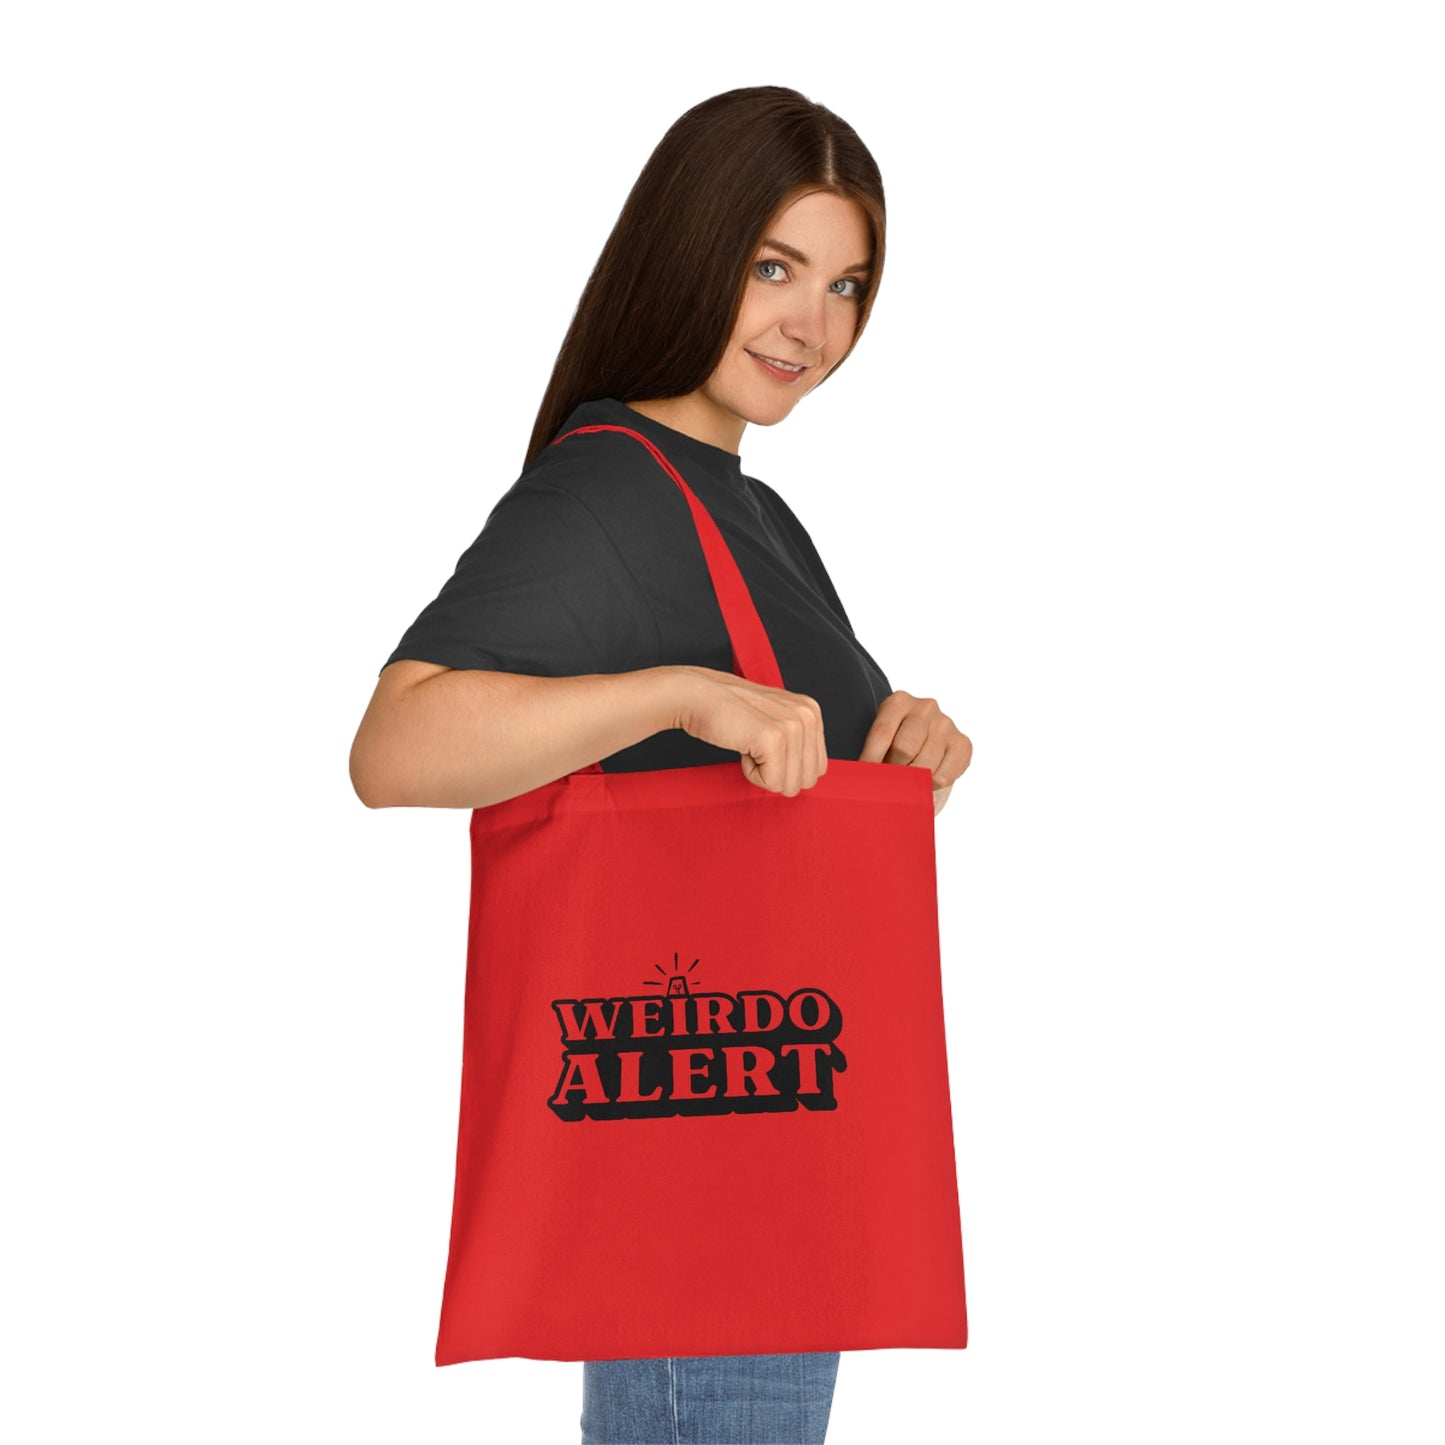 Weirdo | The size of this cotton tote bag is 42x38 cm. The red cotton bag has our funny meme printed at the front in black letters: WEIRDO ALERT